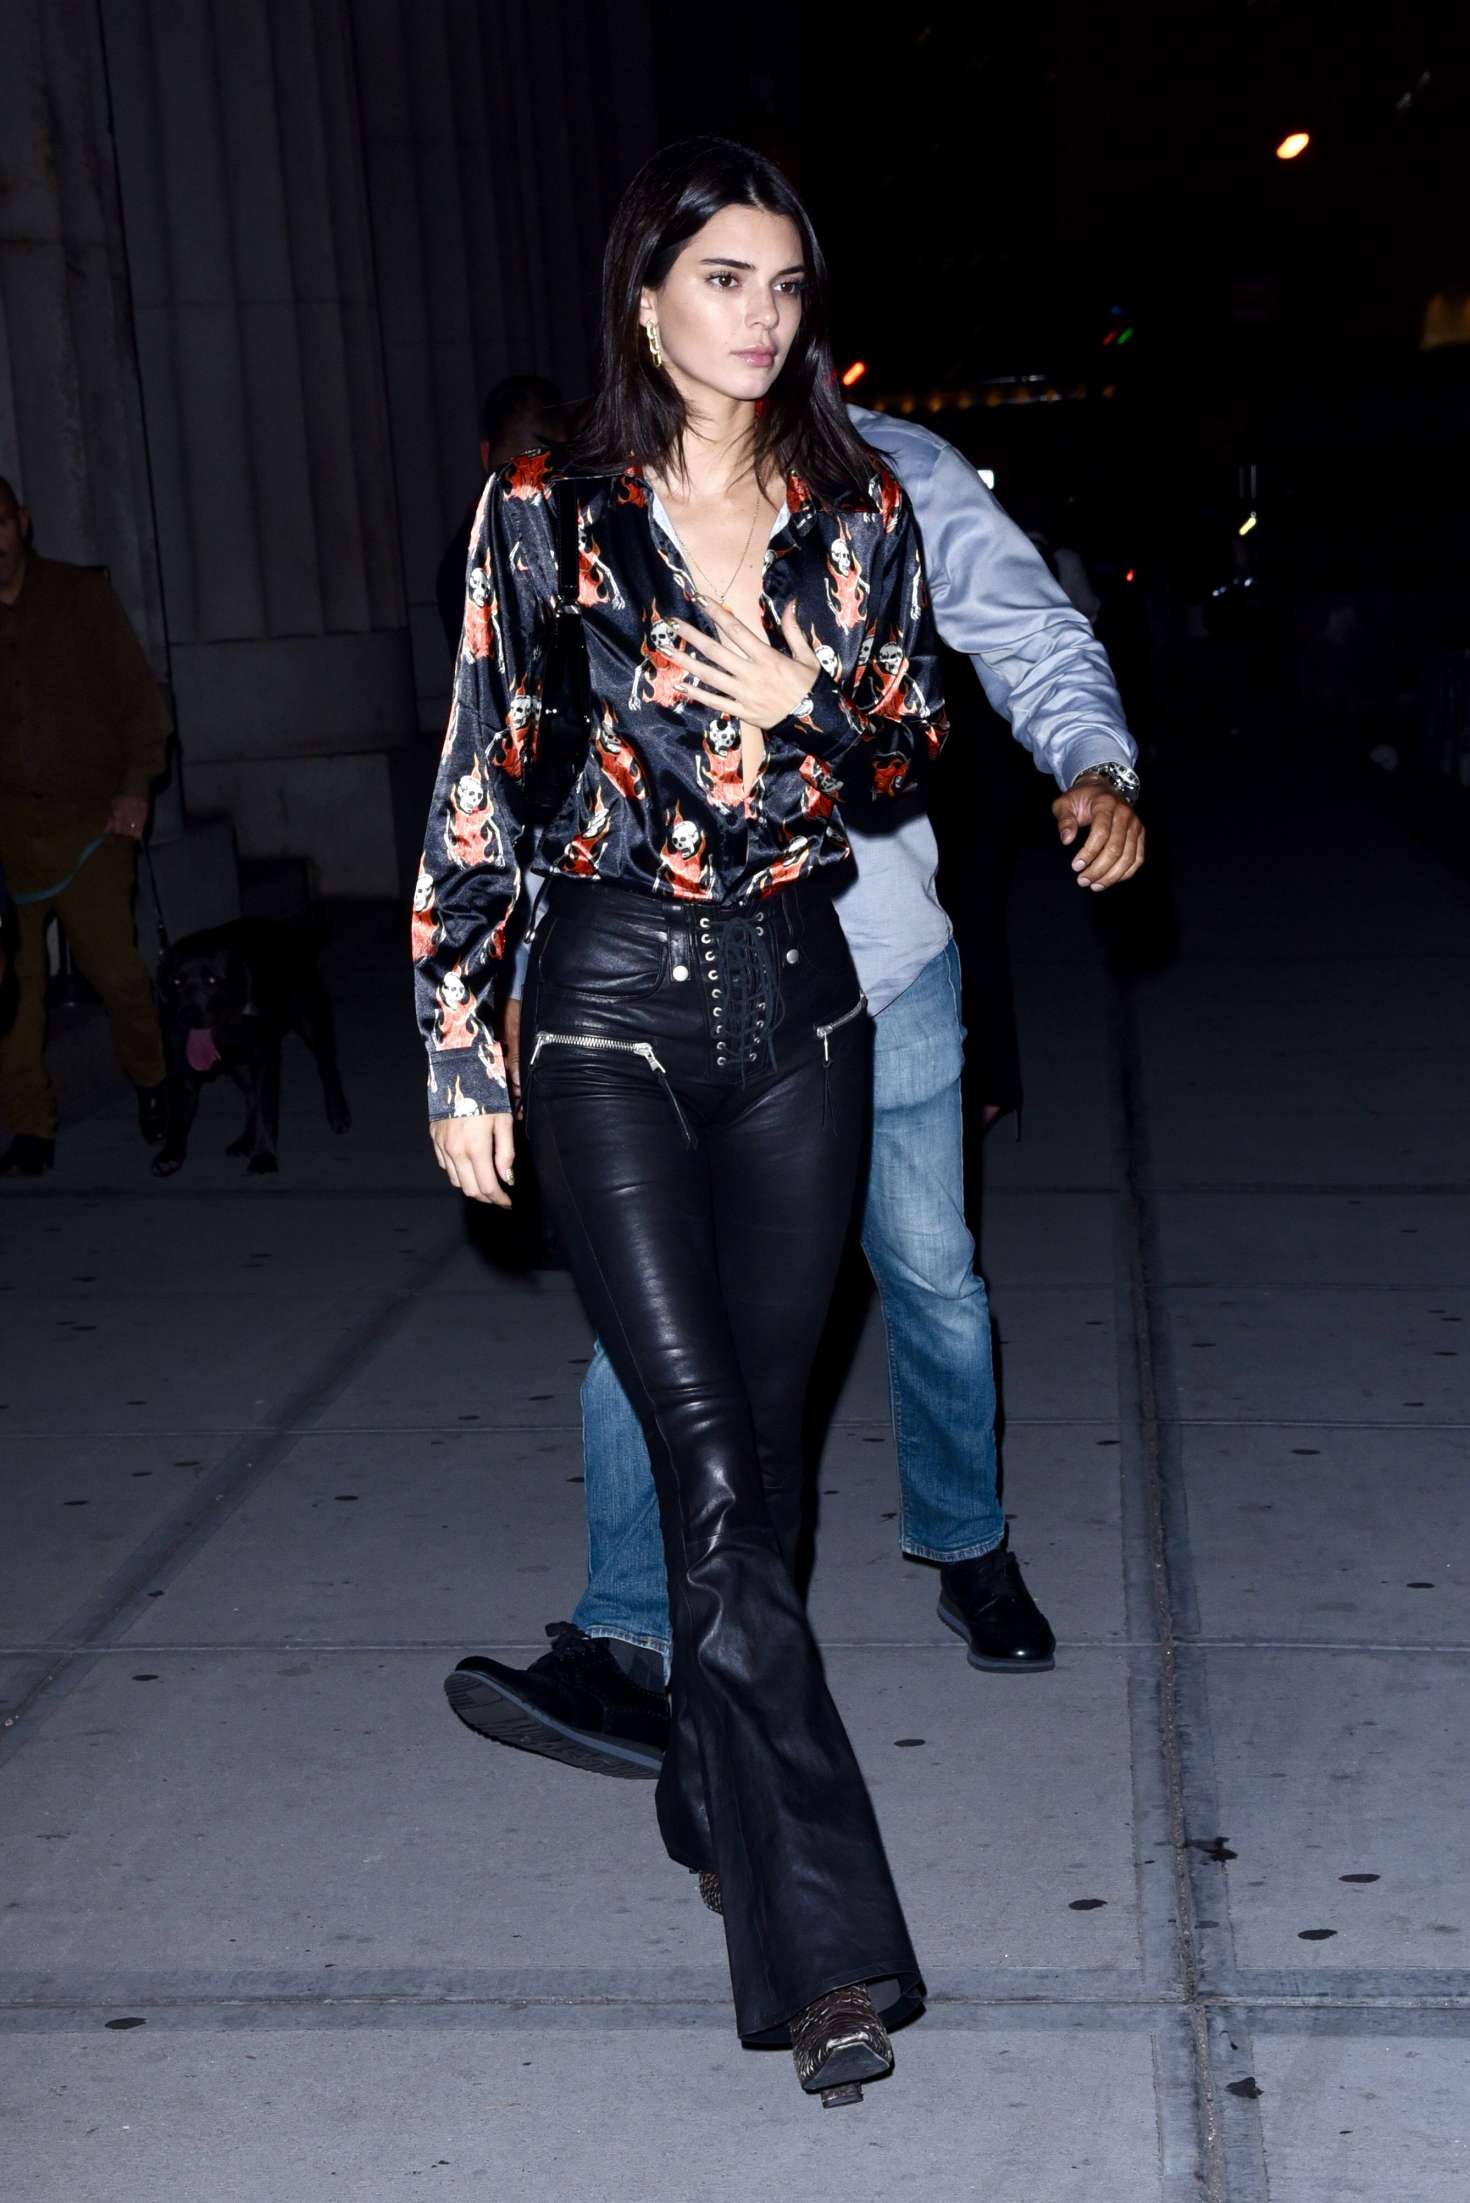 Kendall Jenner in Leather Pants at Nobu restaurant in New York